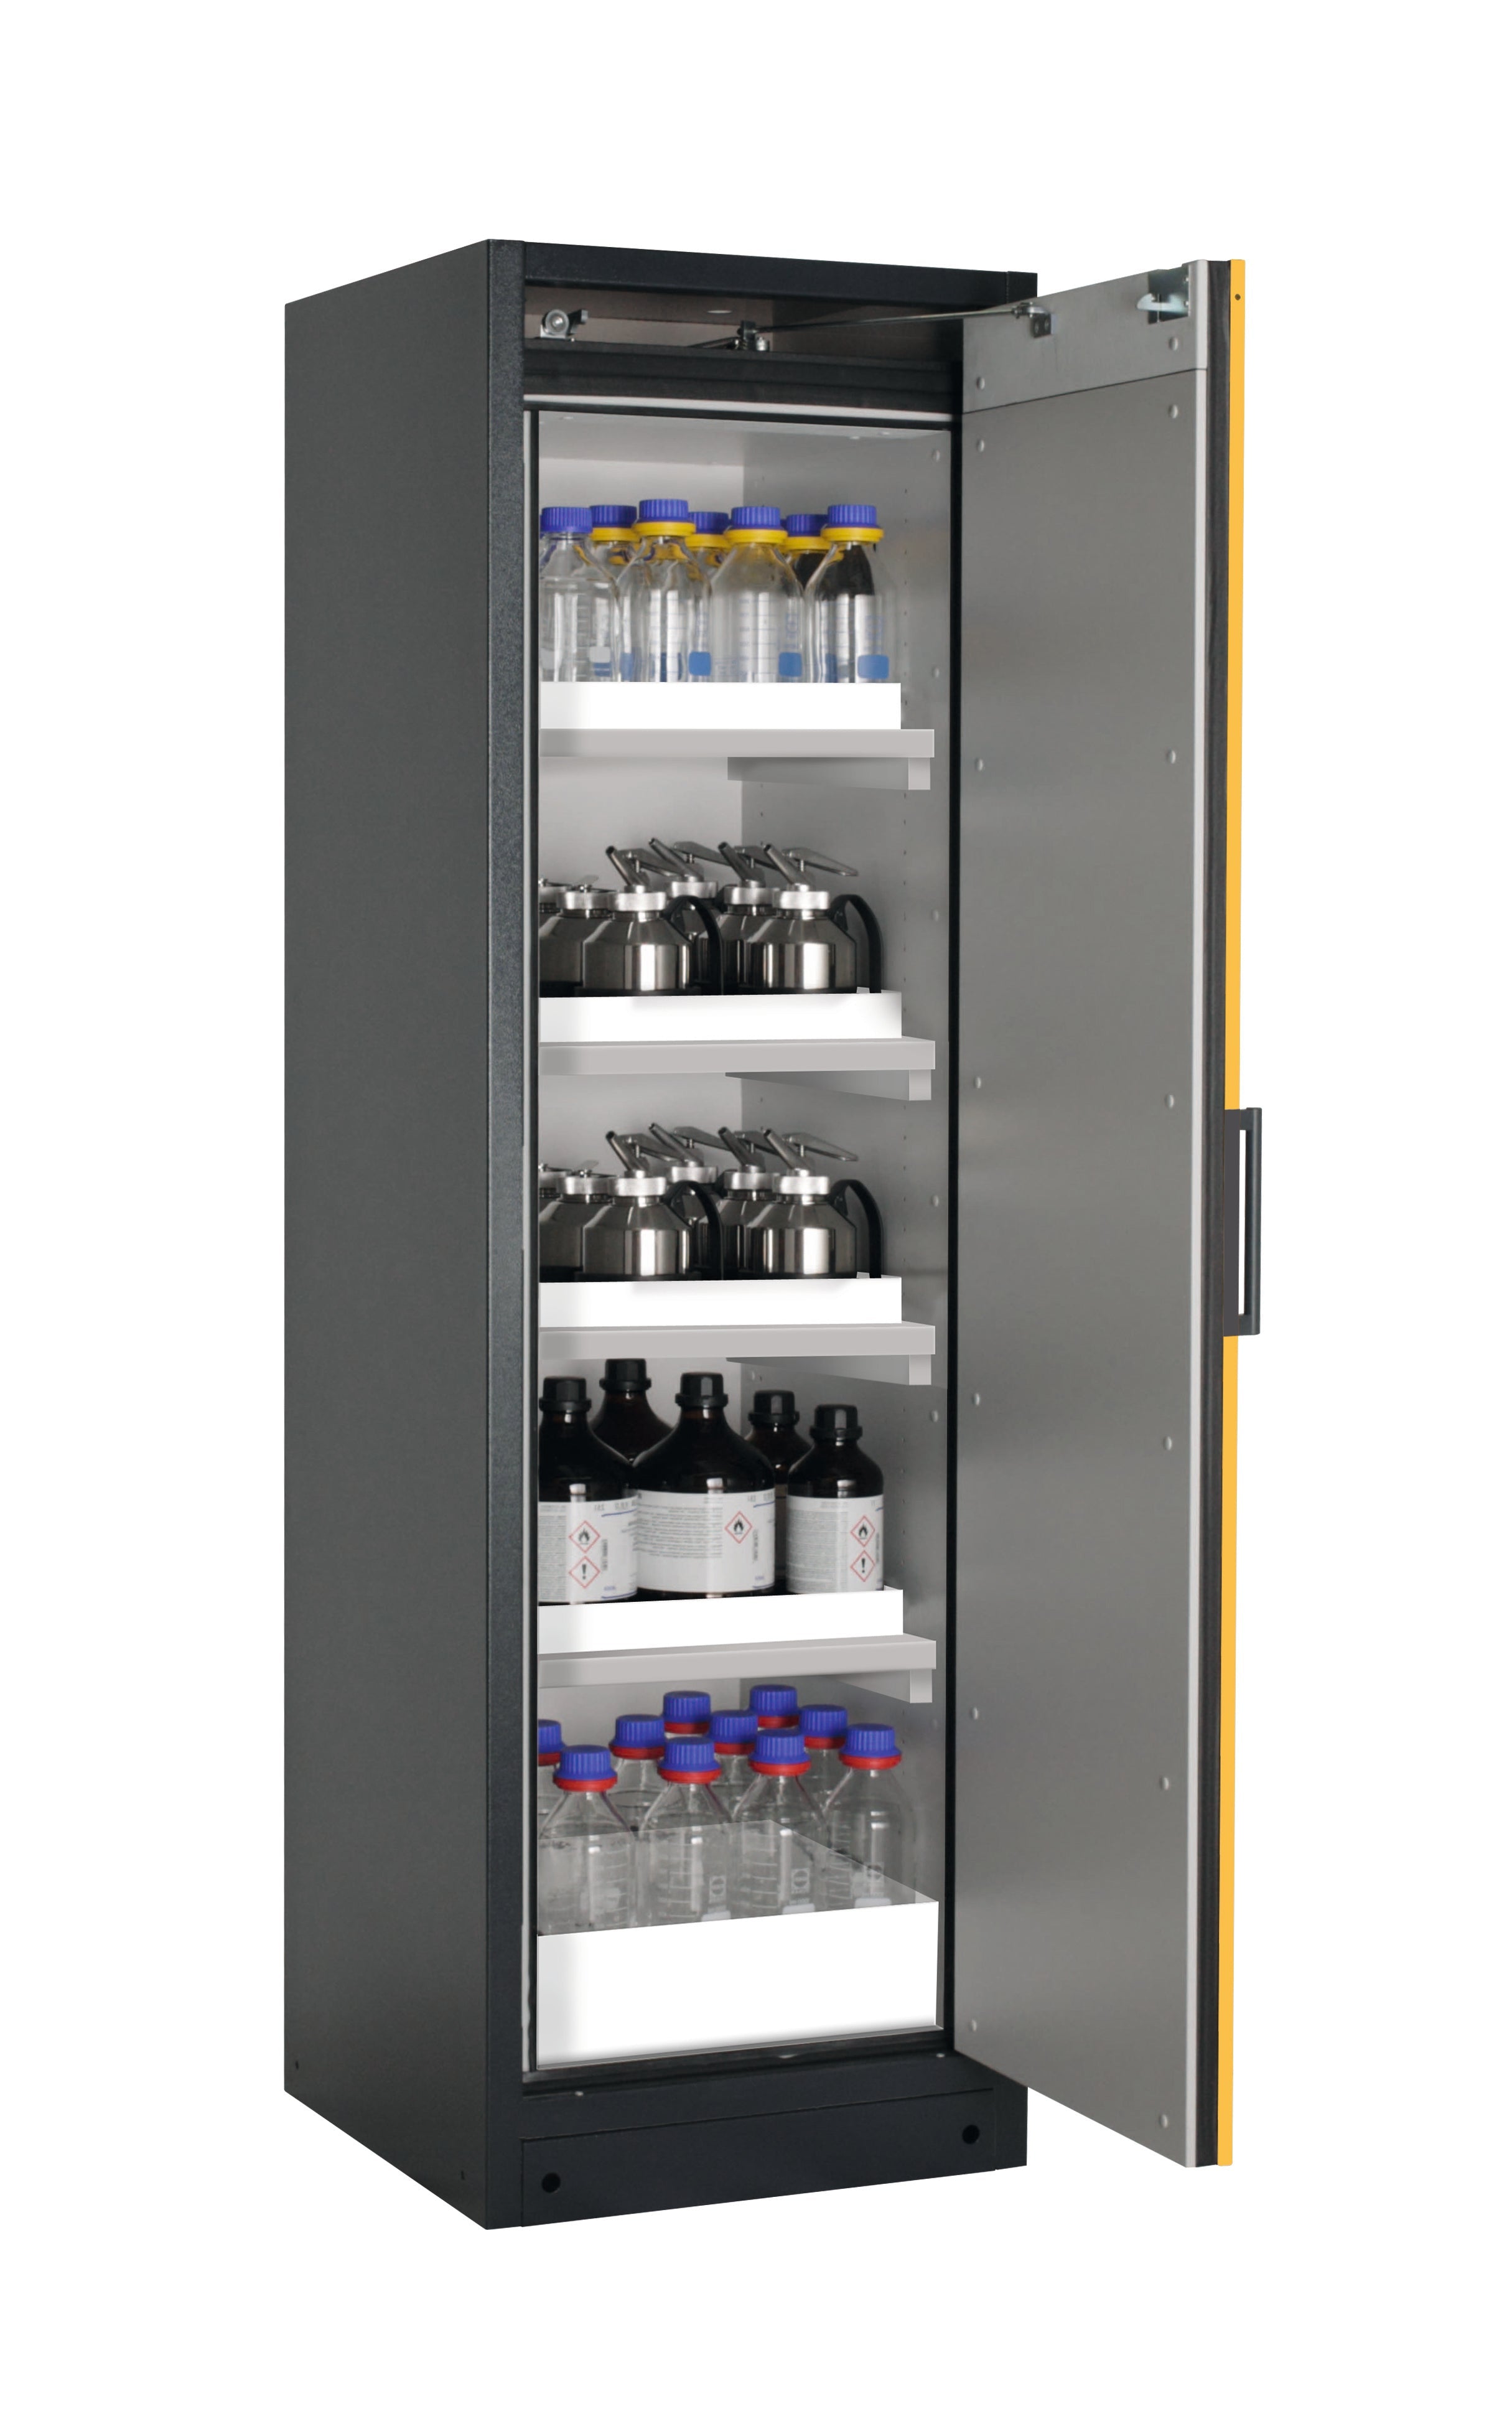 Type 90 safety storage cabinet Q-CLASSIC-90 model Q90.195.060.R in warning yellow RAL 1004 with 4x tray shelf (standard) (polypropylene),